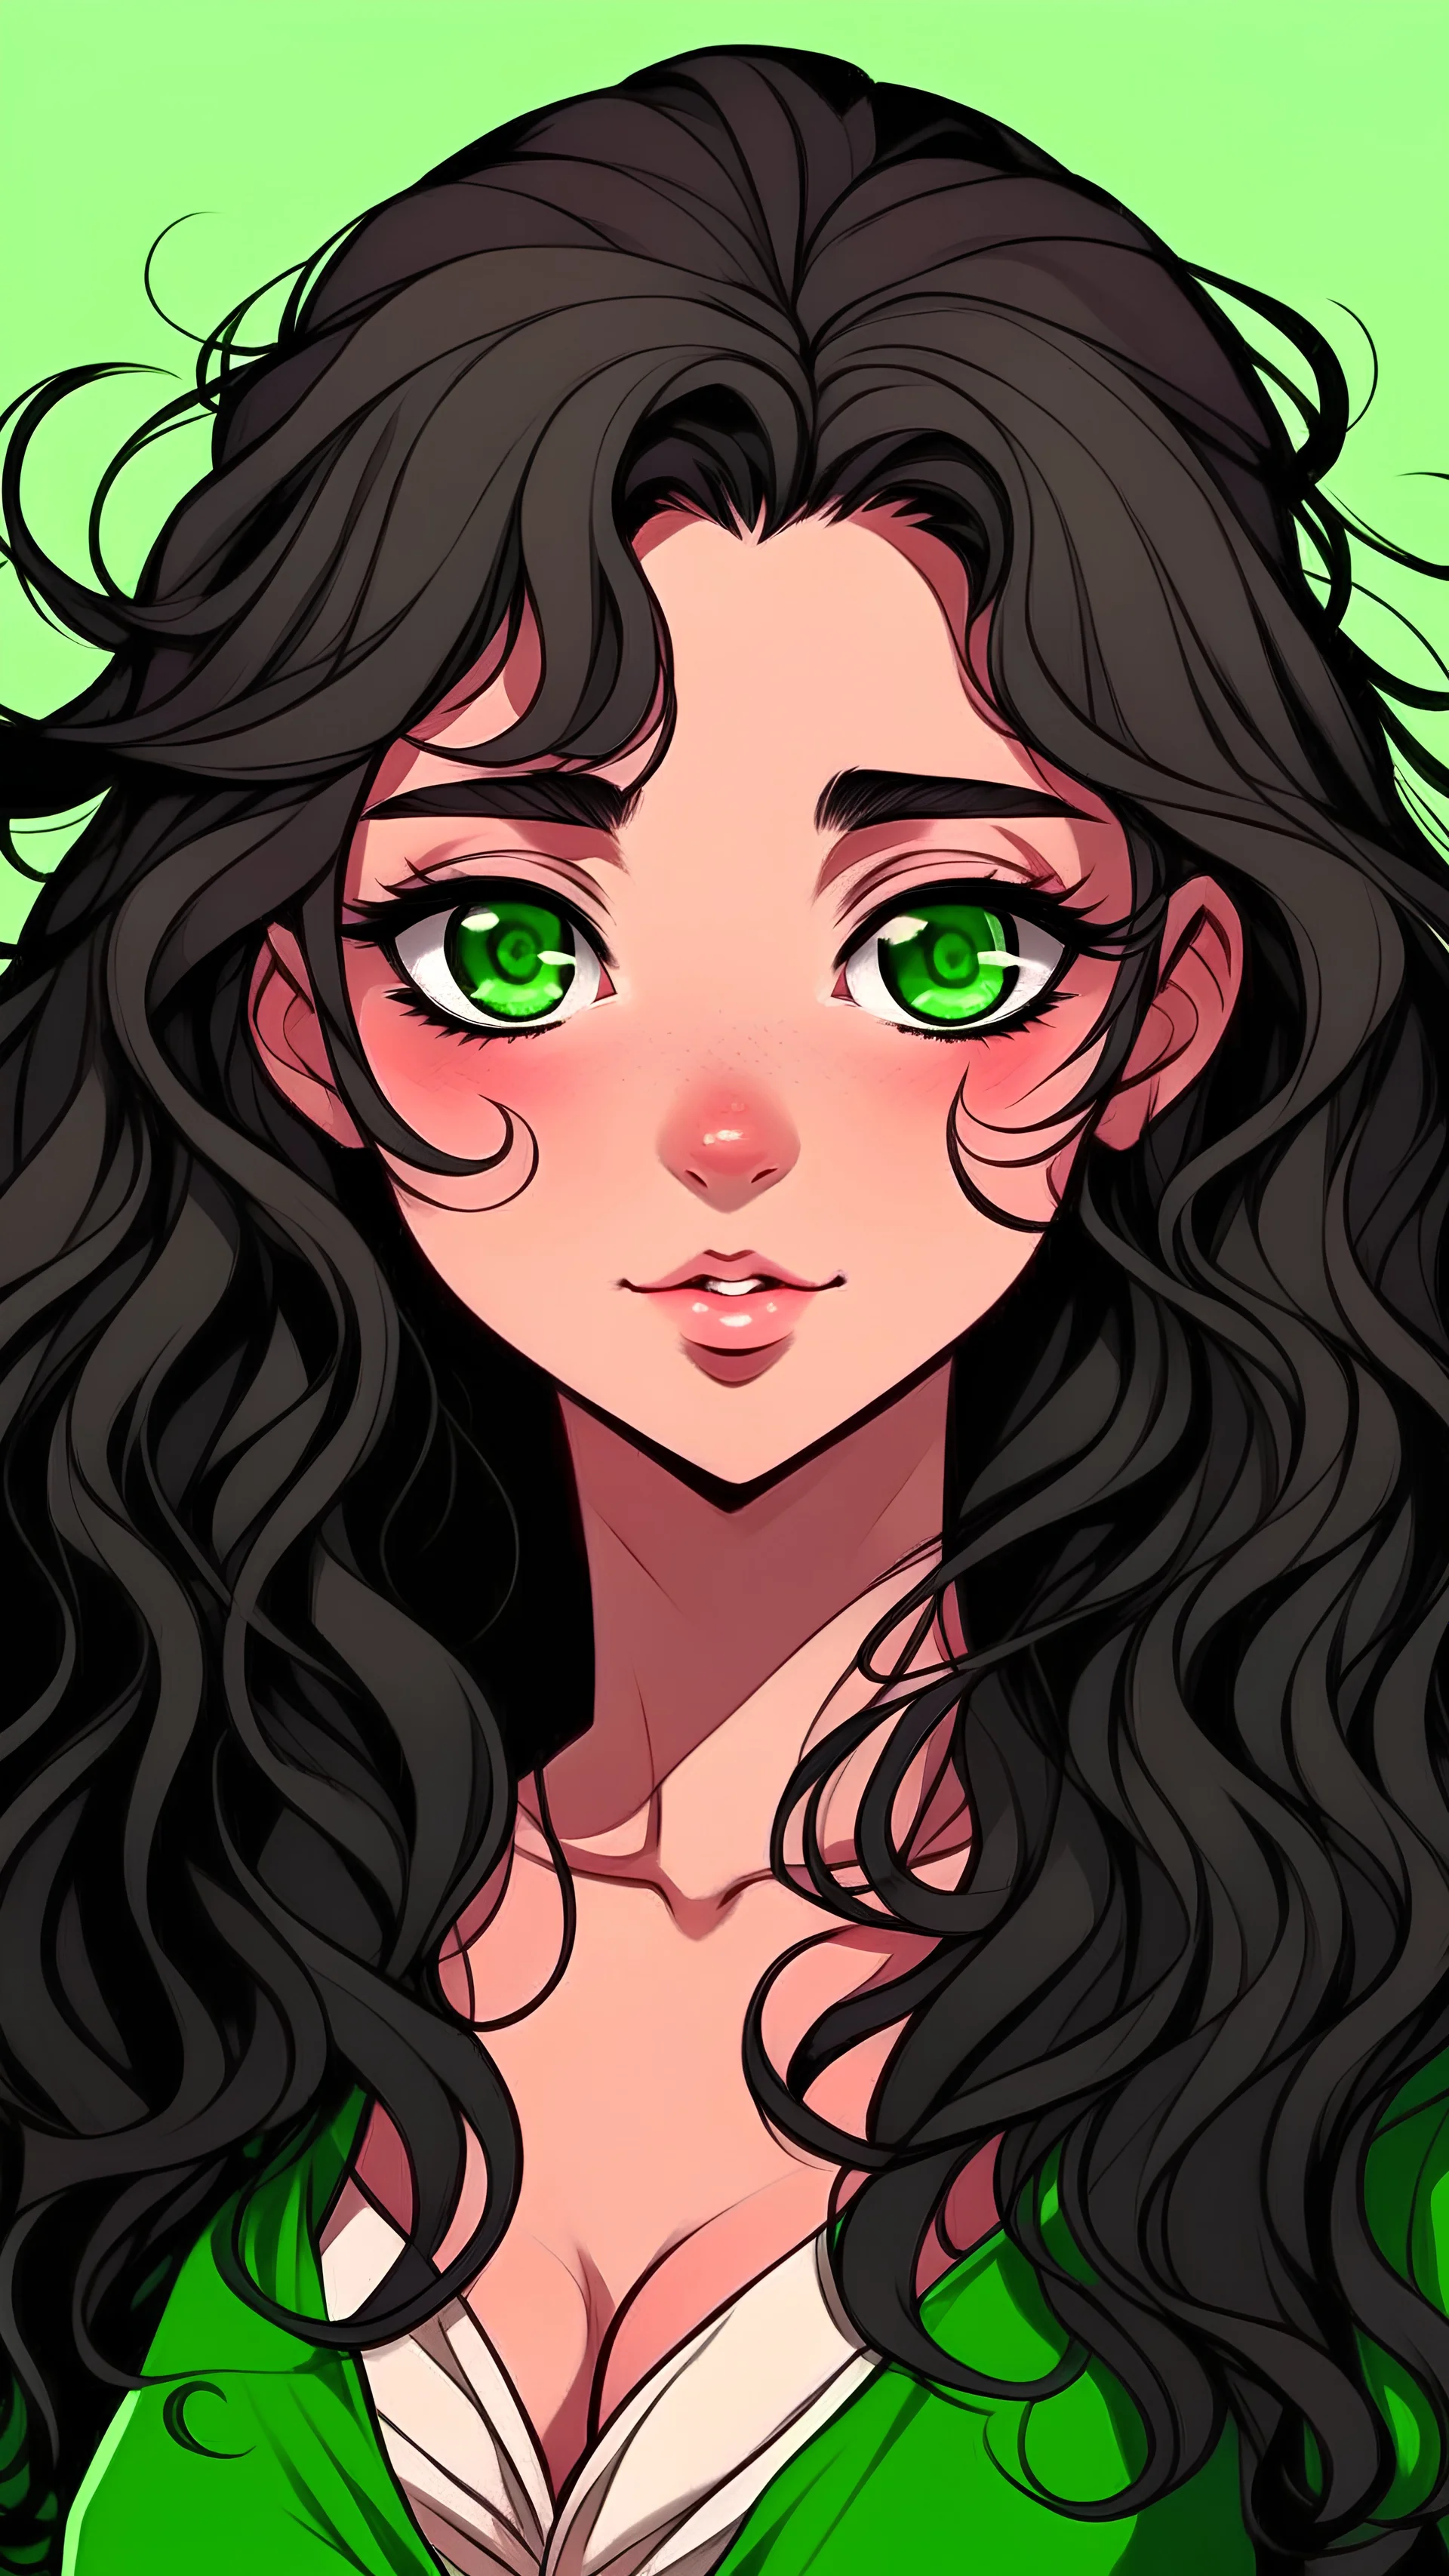 anime girl with dark skin that has long curly black hair and green eyes